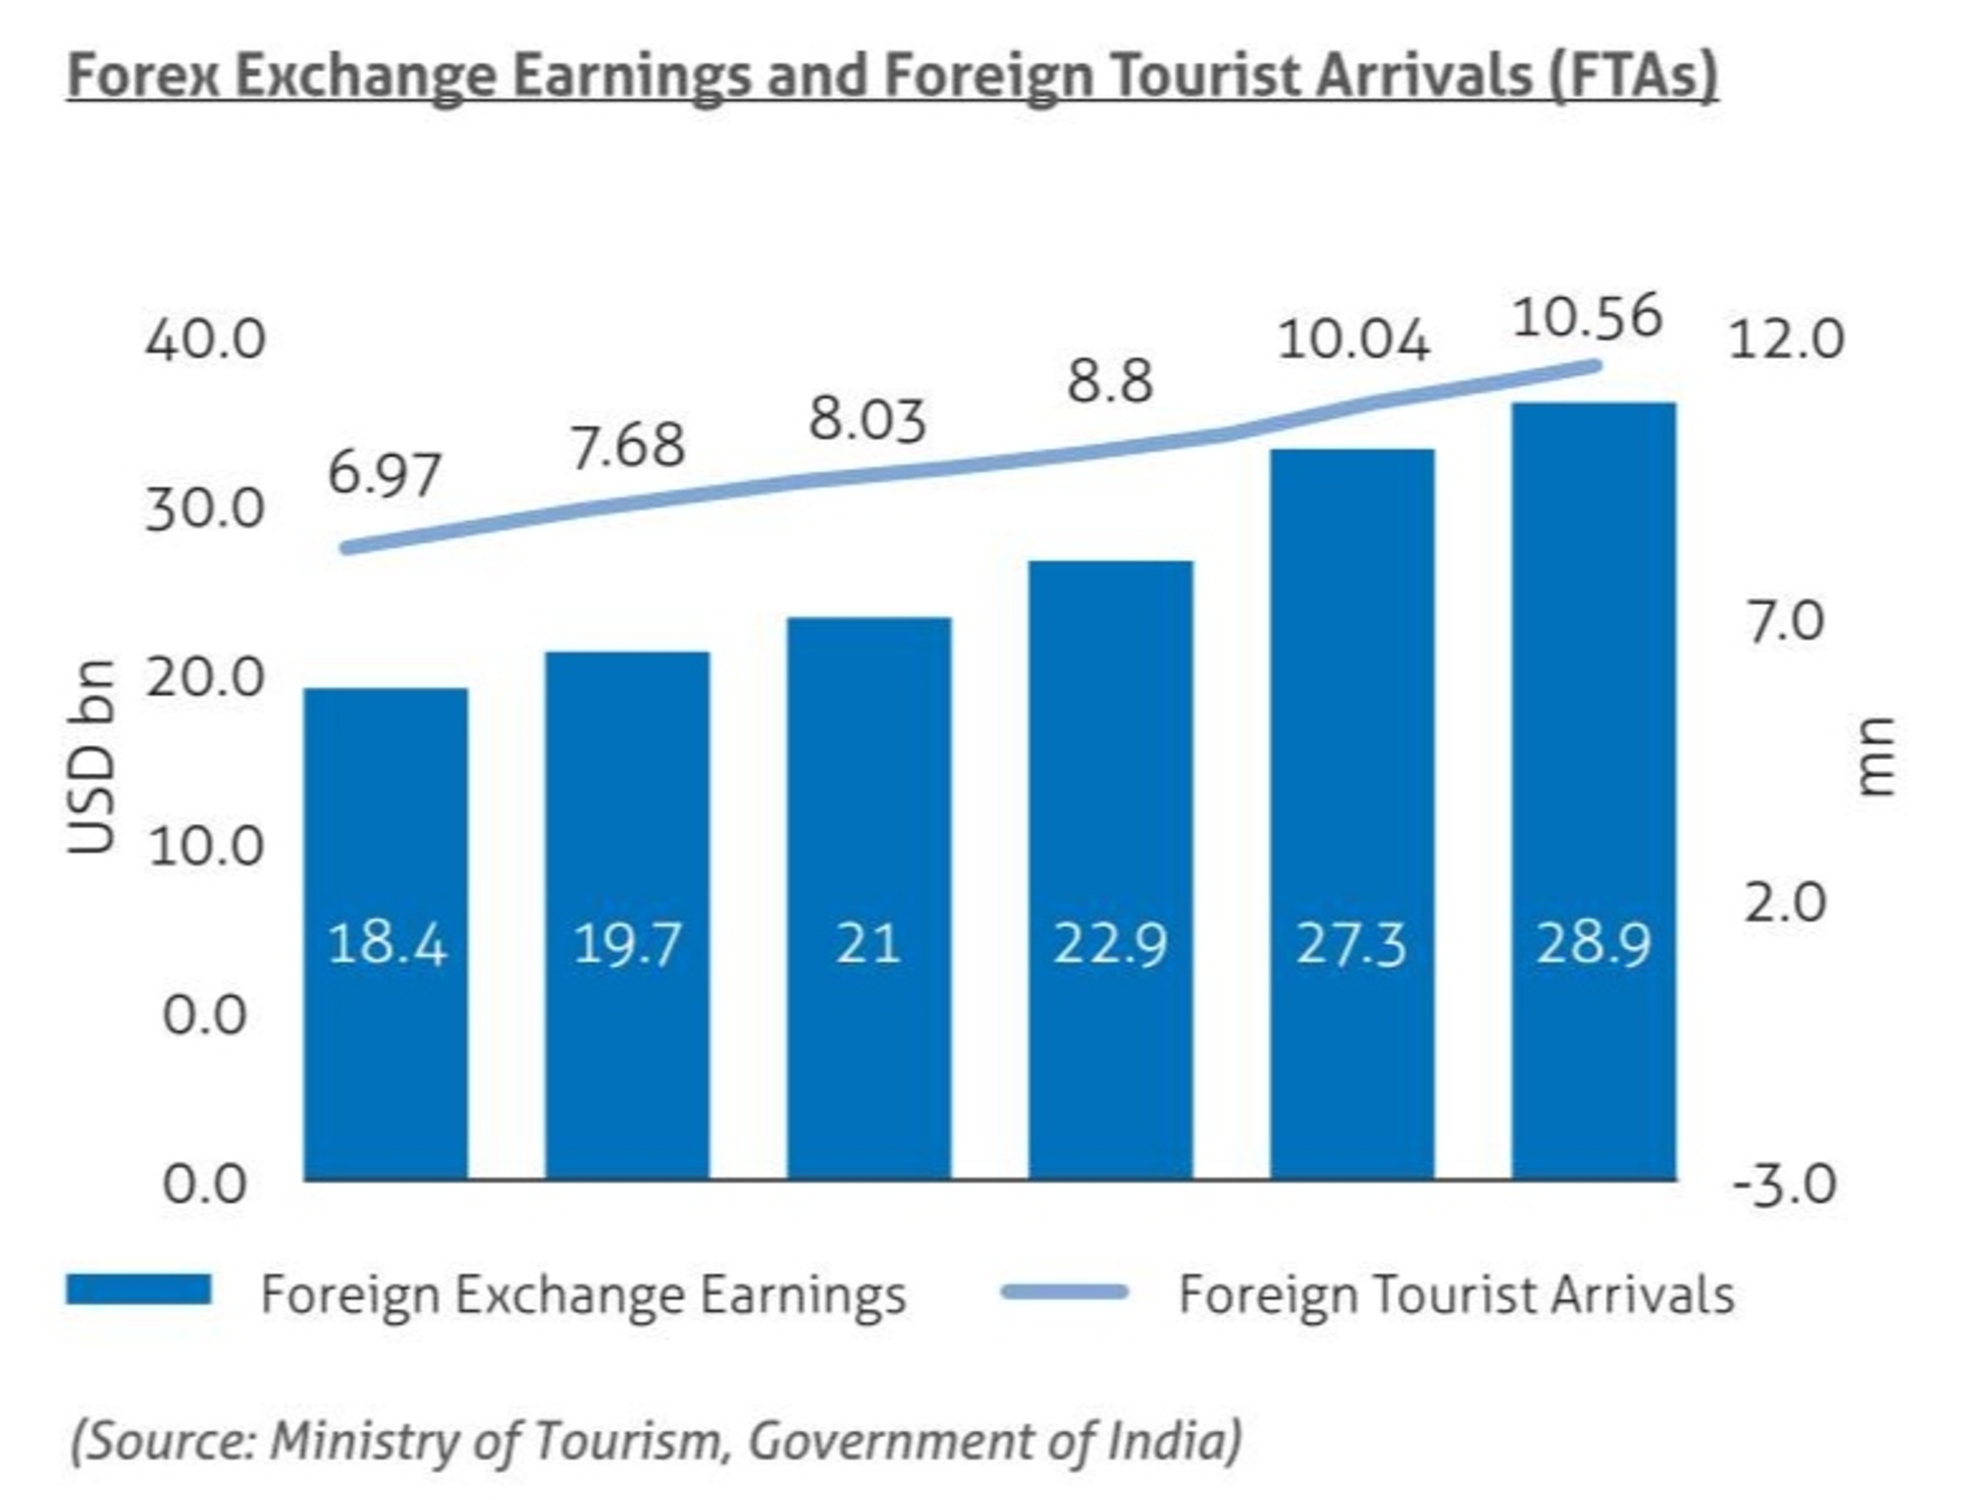 tourism growth rate in india